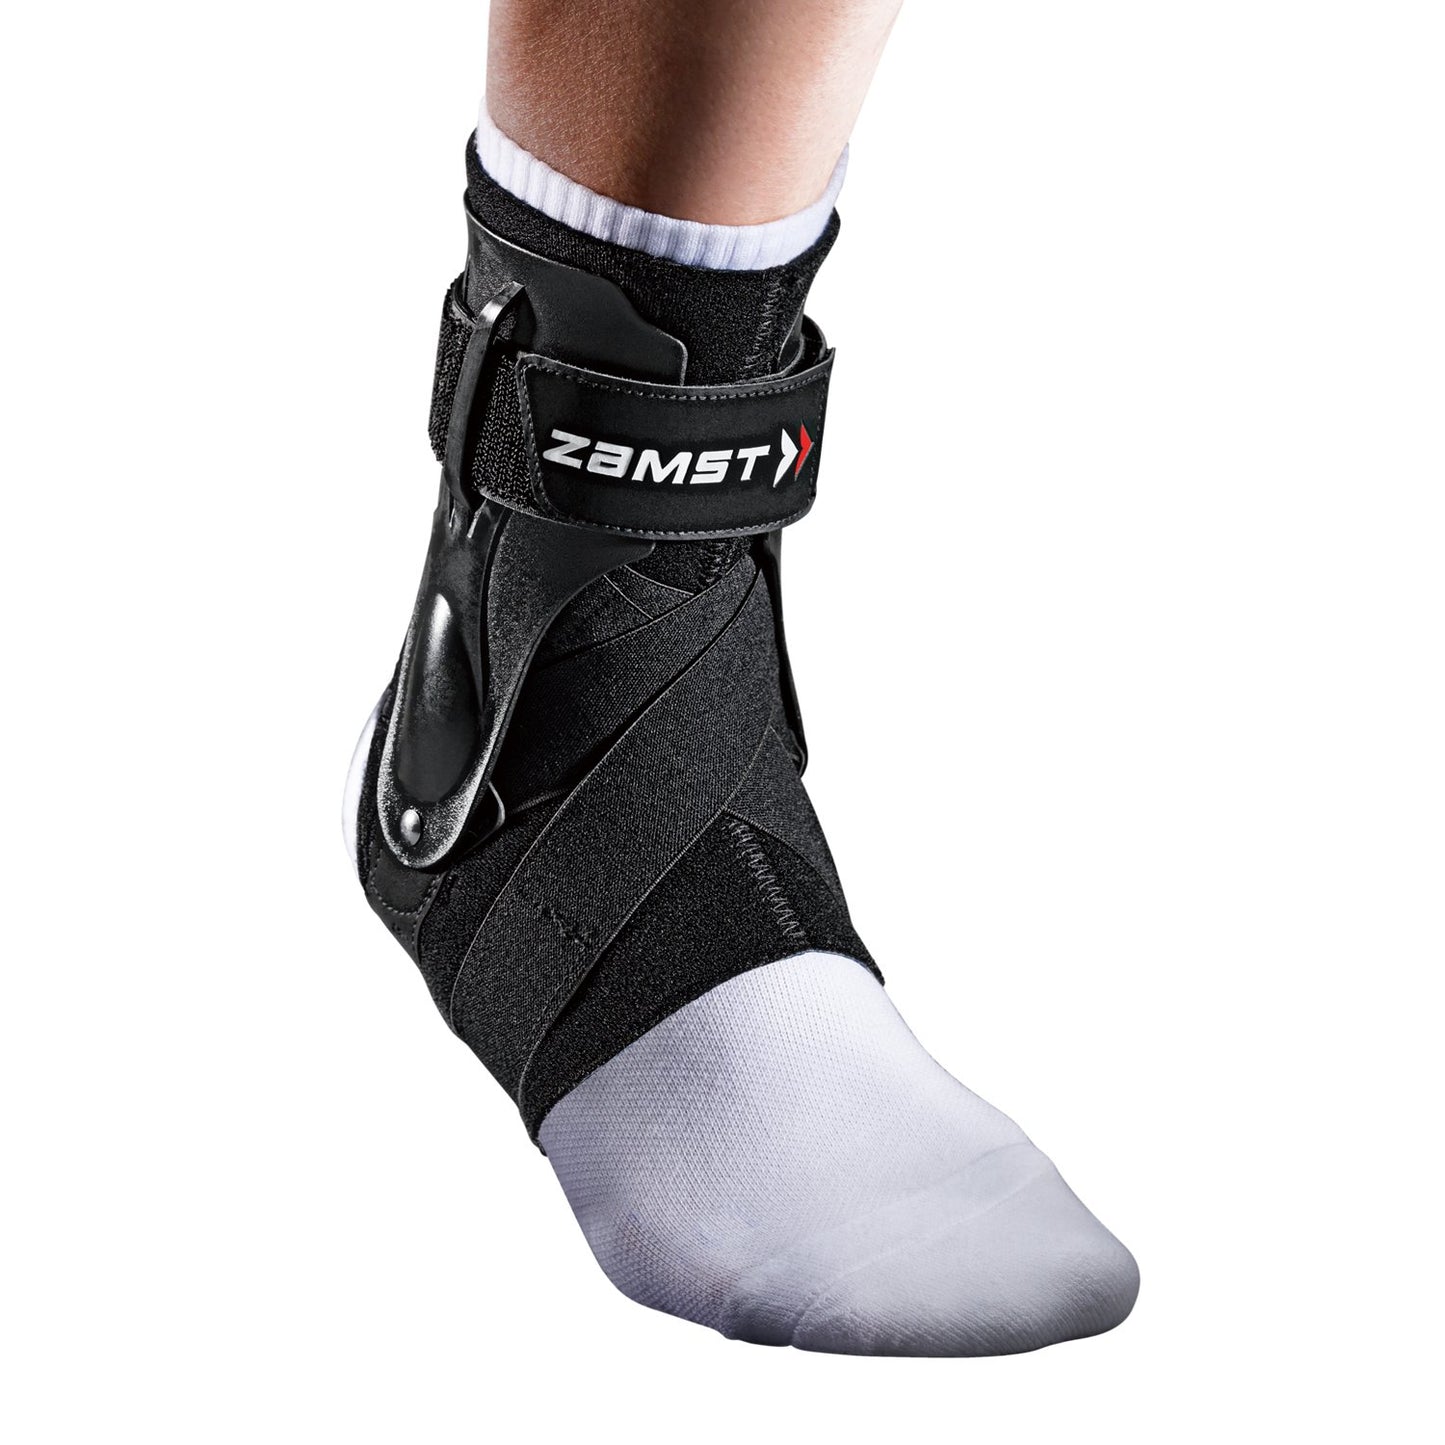 Zamst A2-DX Sports Ankle Brace with Protective Guards For High Ankle Sprains and Chronic Ankle Instability-for Basketball, Volleyball, Lacrosse, Football-Black, Right Large